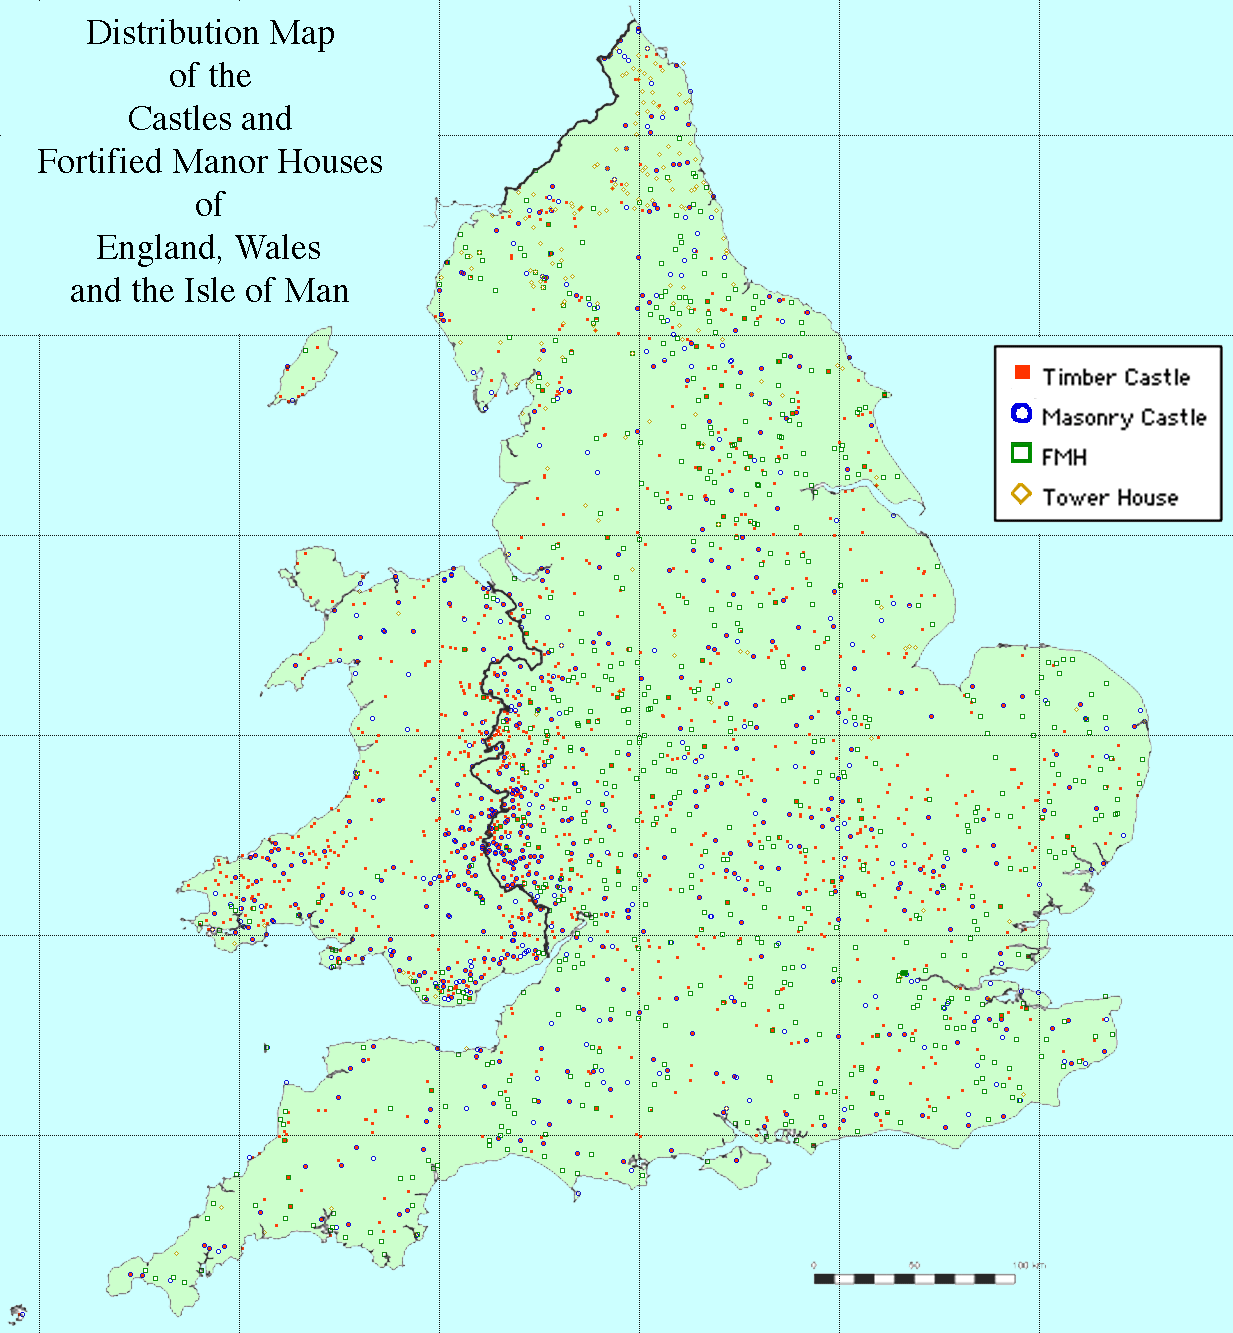 Distribution Map of Castles and Fortified Manor Houses in England and Wales